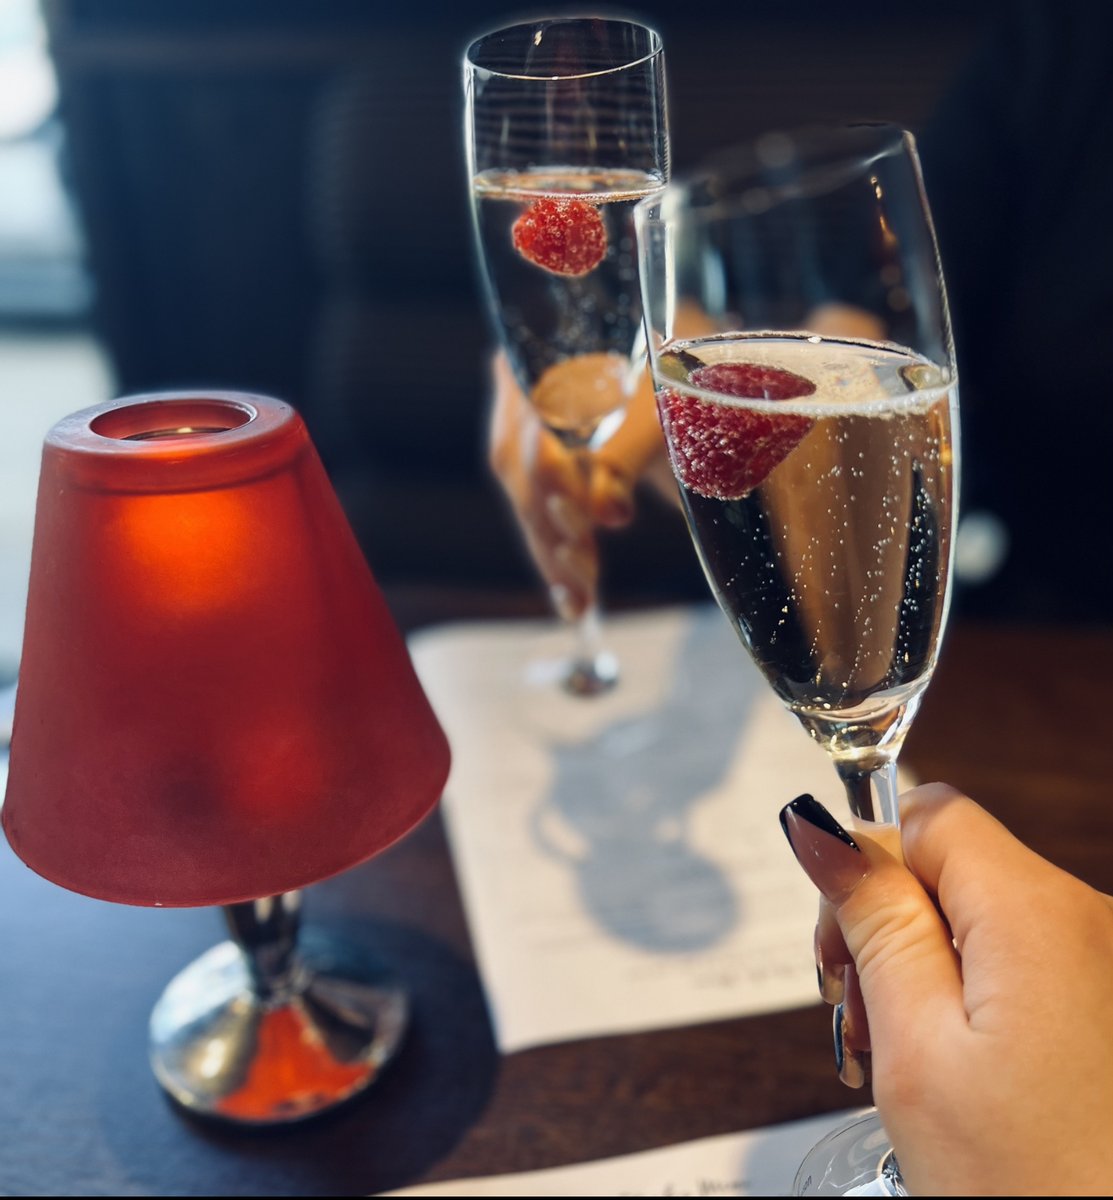 Found: One FREE glass of prosecco 📢 ​ If you want to claim it, sign up to our app and join us at your local Miller & Carter 😘